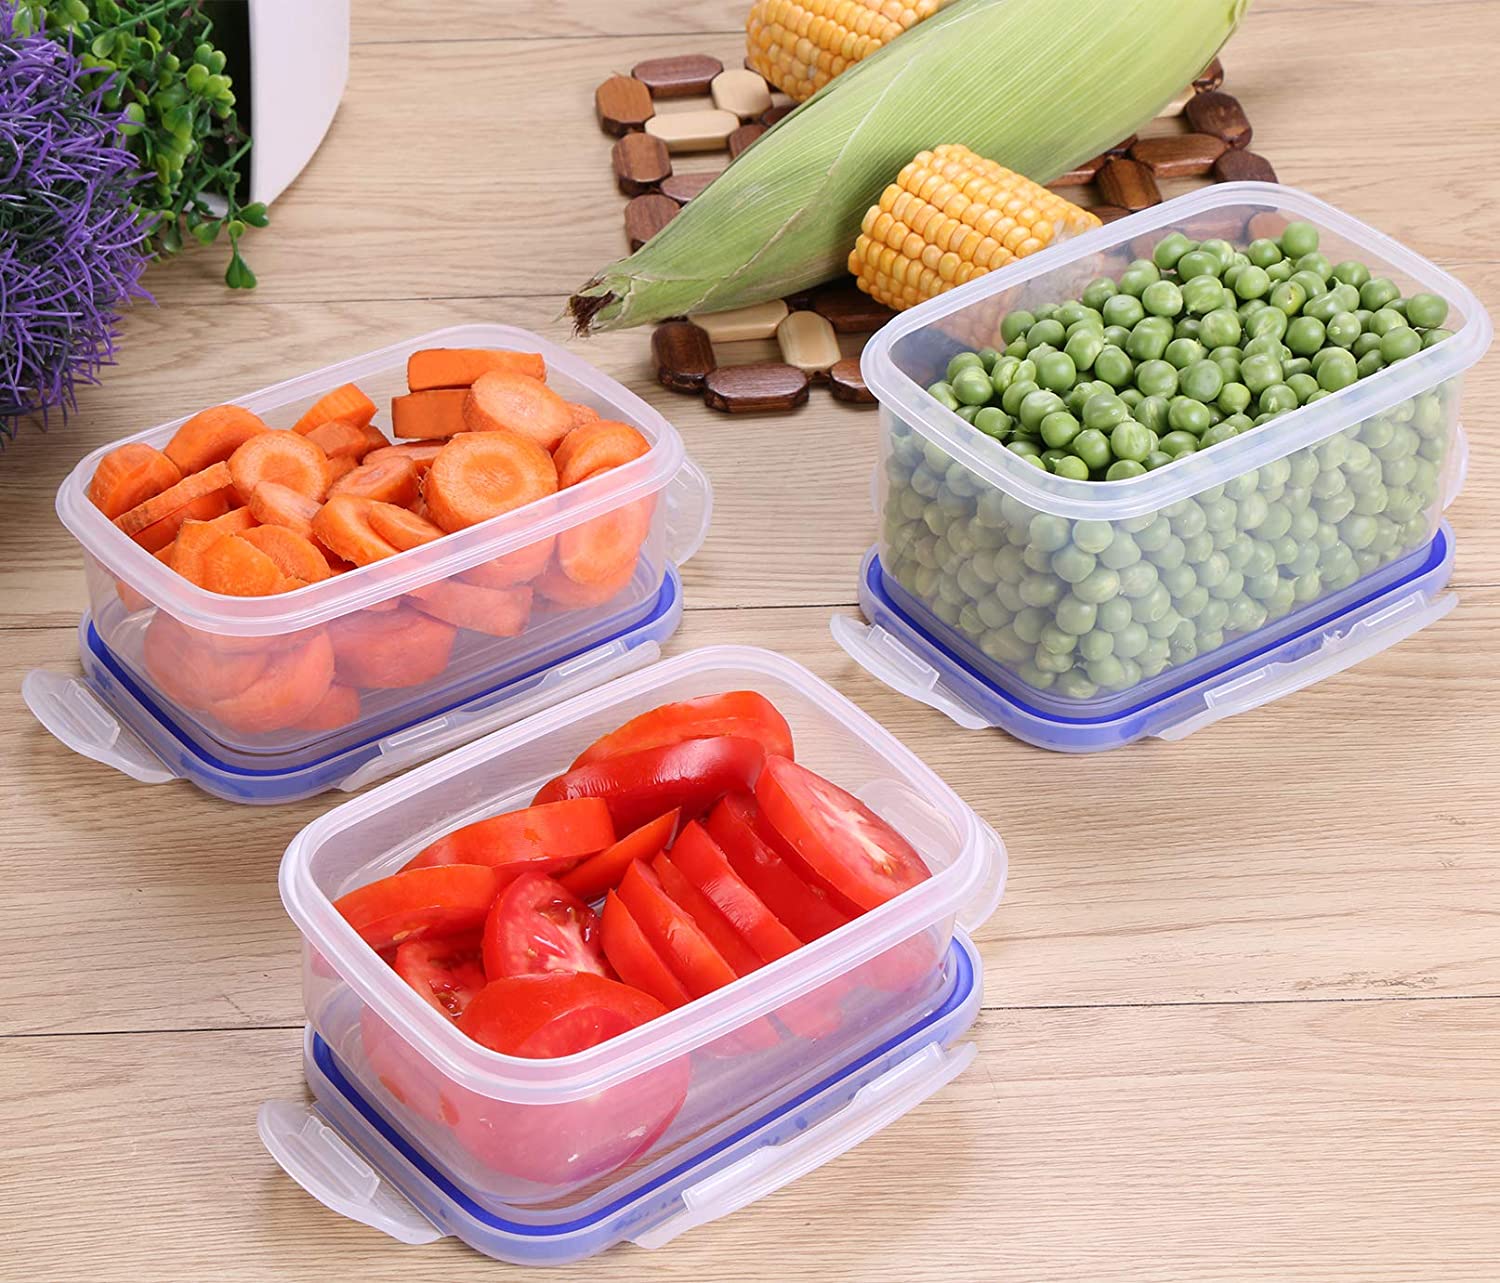 Utopia Kitchen 18 Pieces Plastic Food Containers Set (9 Containers and